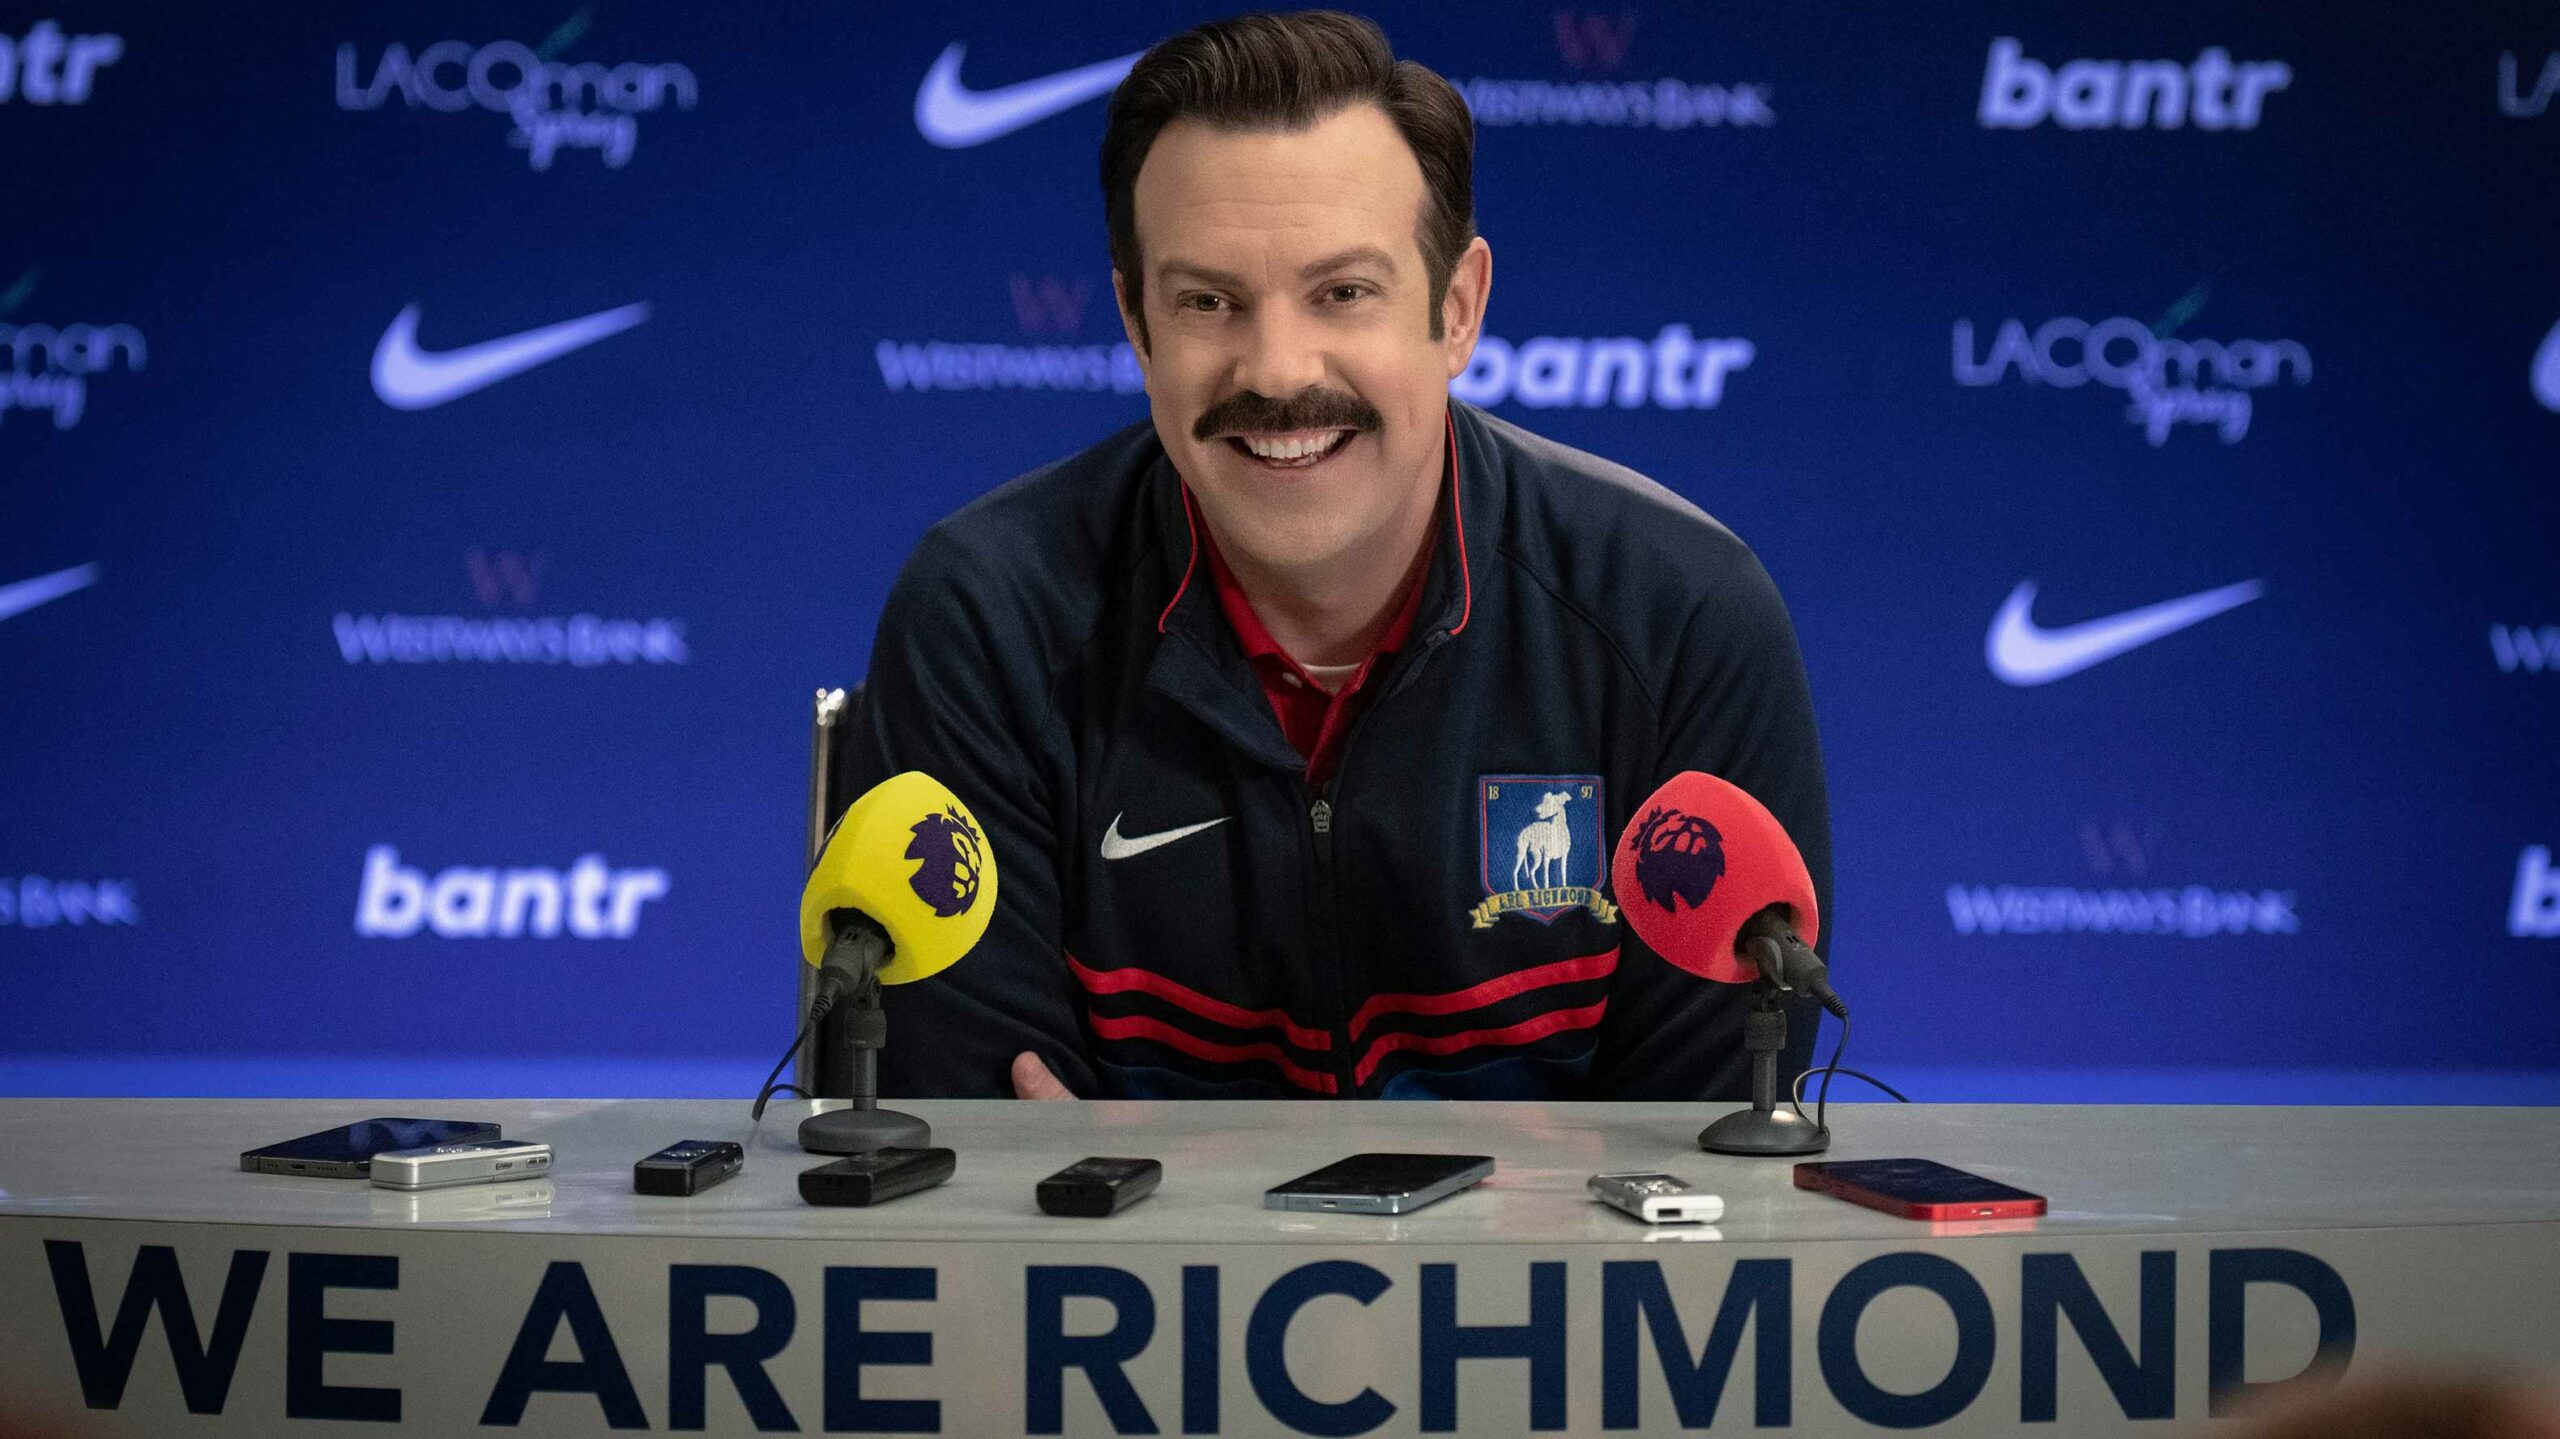 Ted gives a press conference in Ted Lasso Season 3